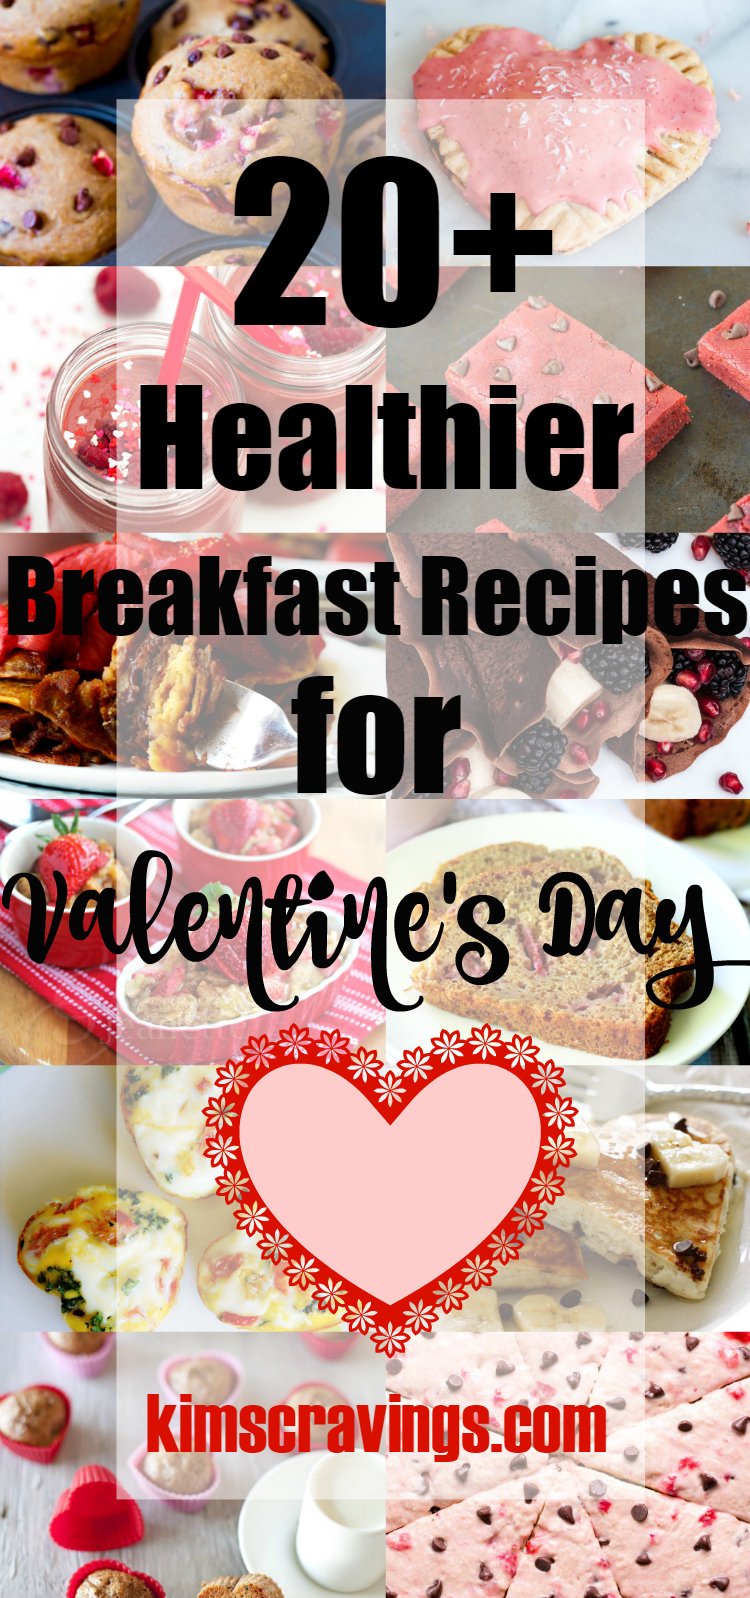 Nothing says "I love you" like breakfast in bed. Choose one... or maybe two treats from this round-up of 15 Healthier Breakfast Recipes for Valentine's Day and make your sweetie very happy!